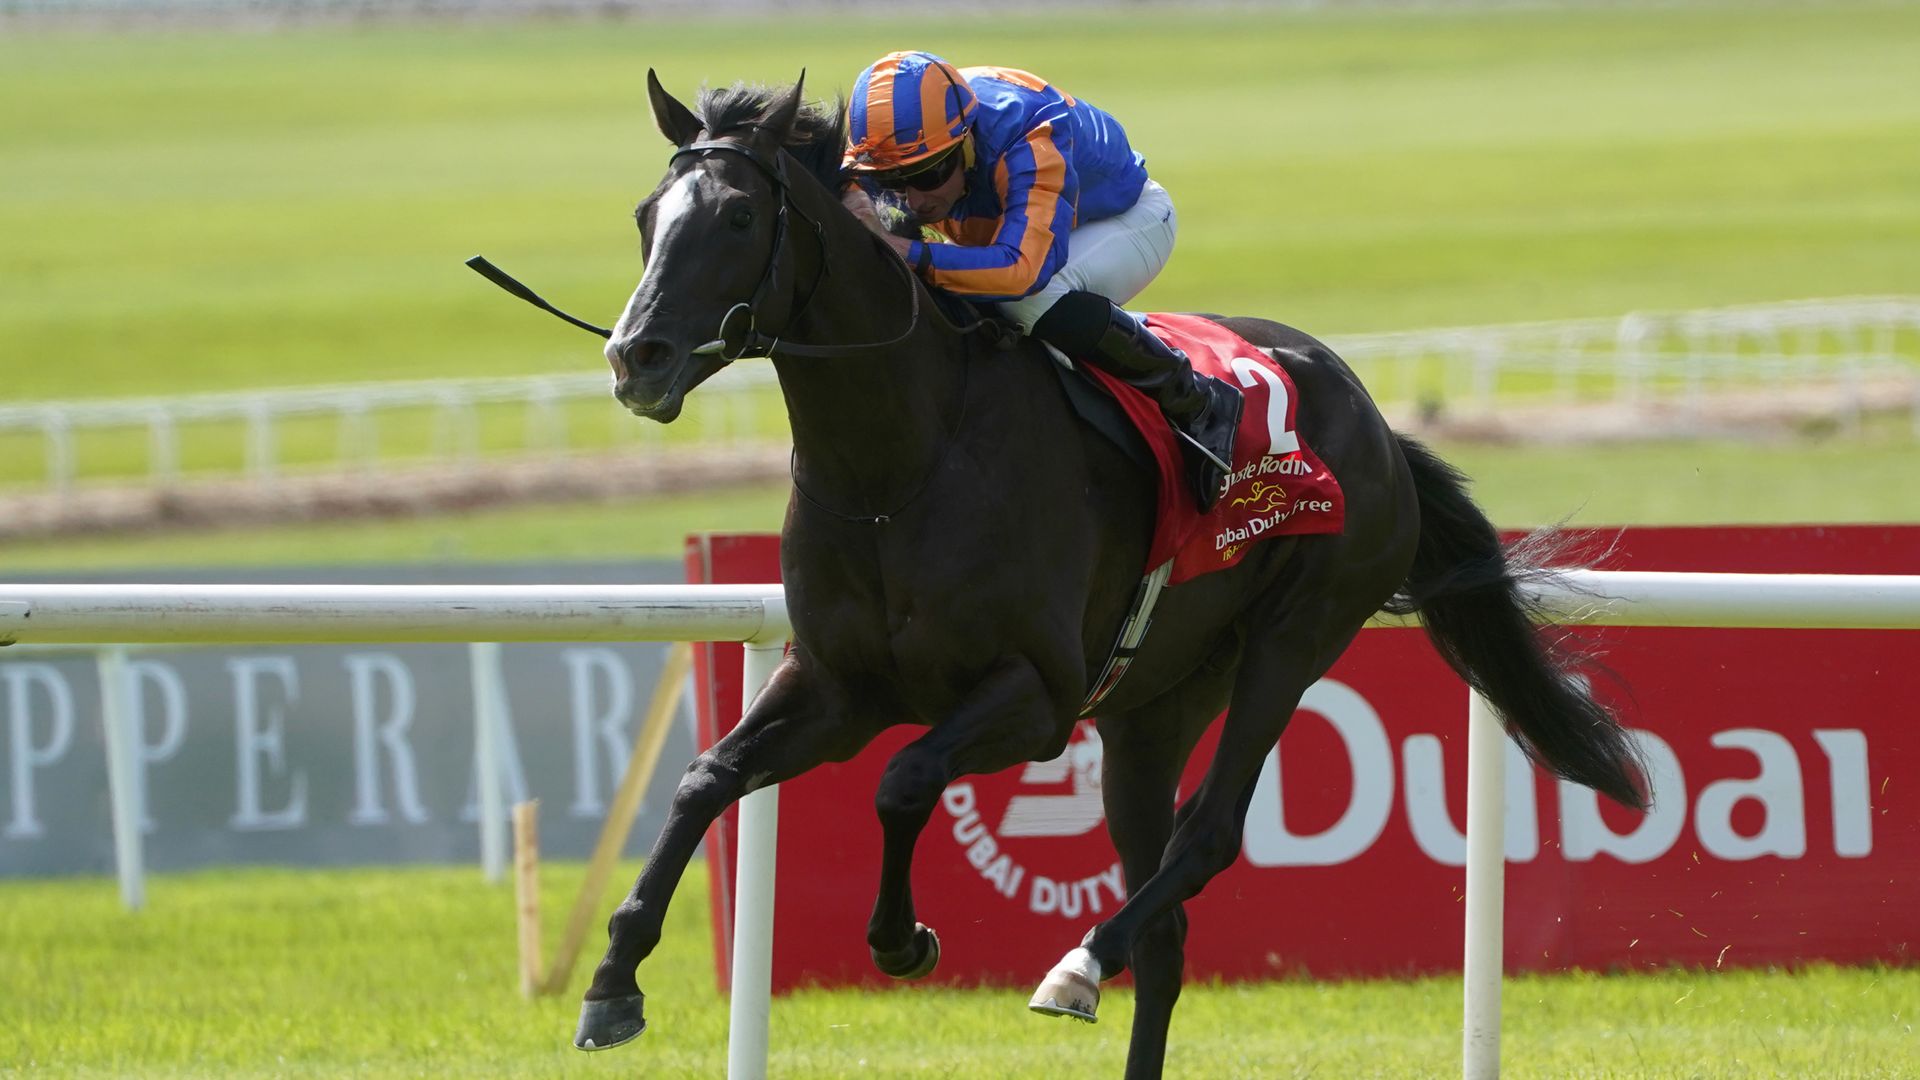 He's done it! Auguste Rodin completes famous Derby double